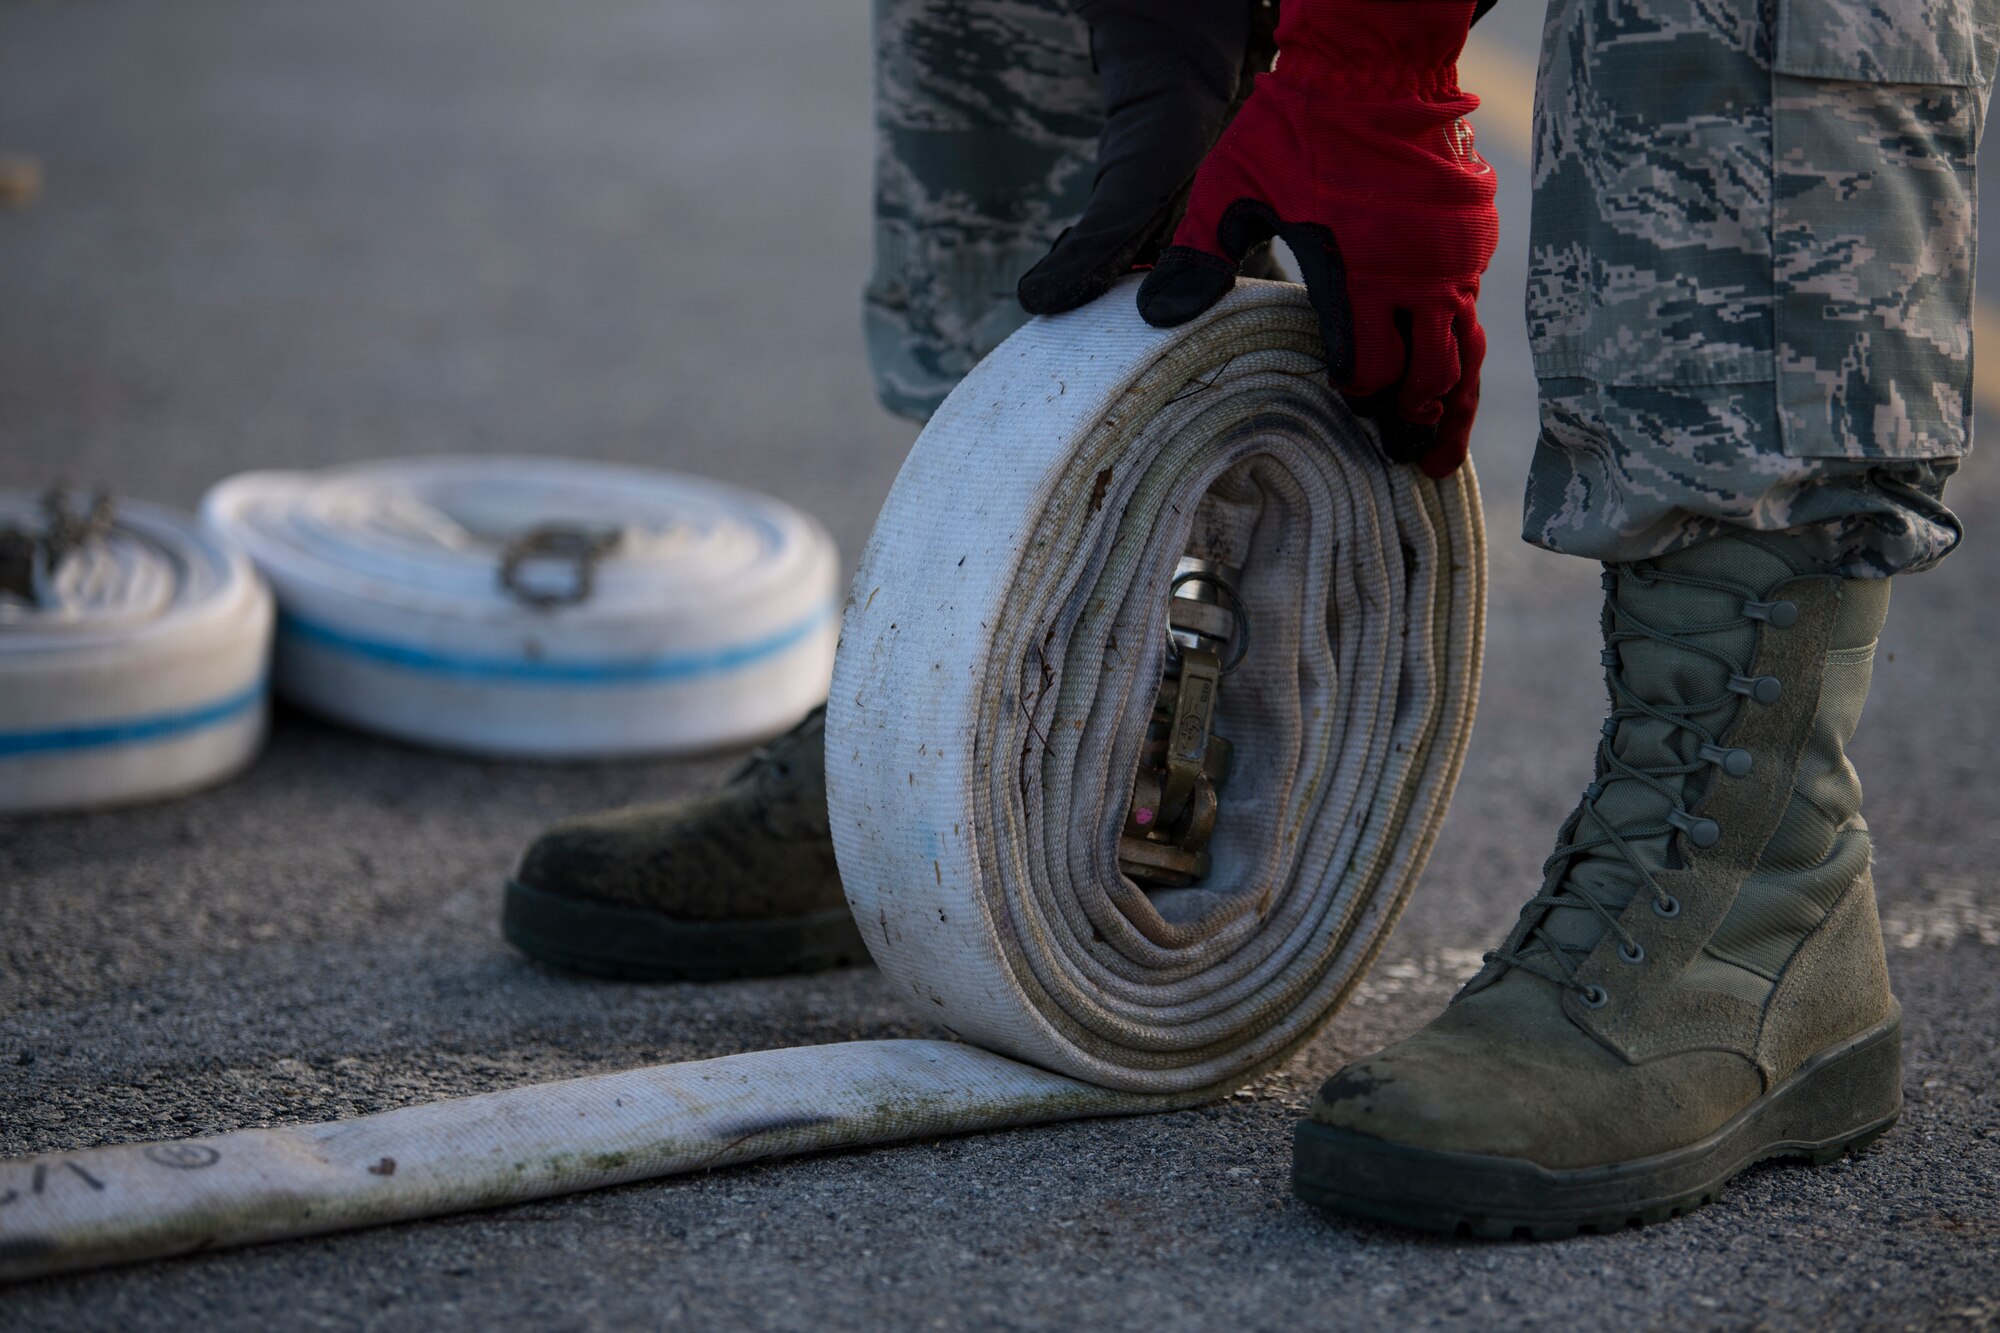 Staff Sgt. Martin Figueroa Ortiz, 36th Civil Engineer Squadron electrical systems maintainer assigned to Andersen Air Base, Guam, rolls up a hose during reverse osmosis water purification unit tear down on Saipan, Commonwealth of the Northern Mariana Islands, Nov. 21, 2018, as part of the Super Typhoon Yutu relief effort.